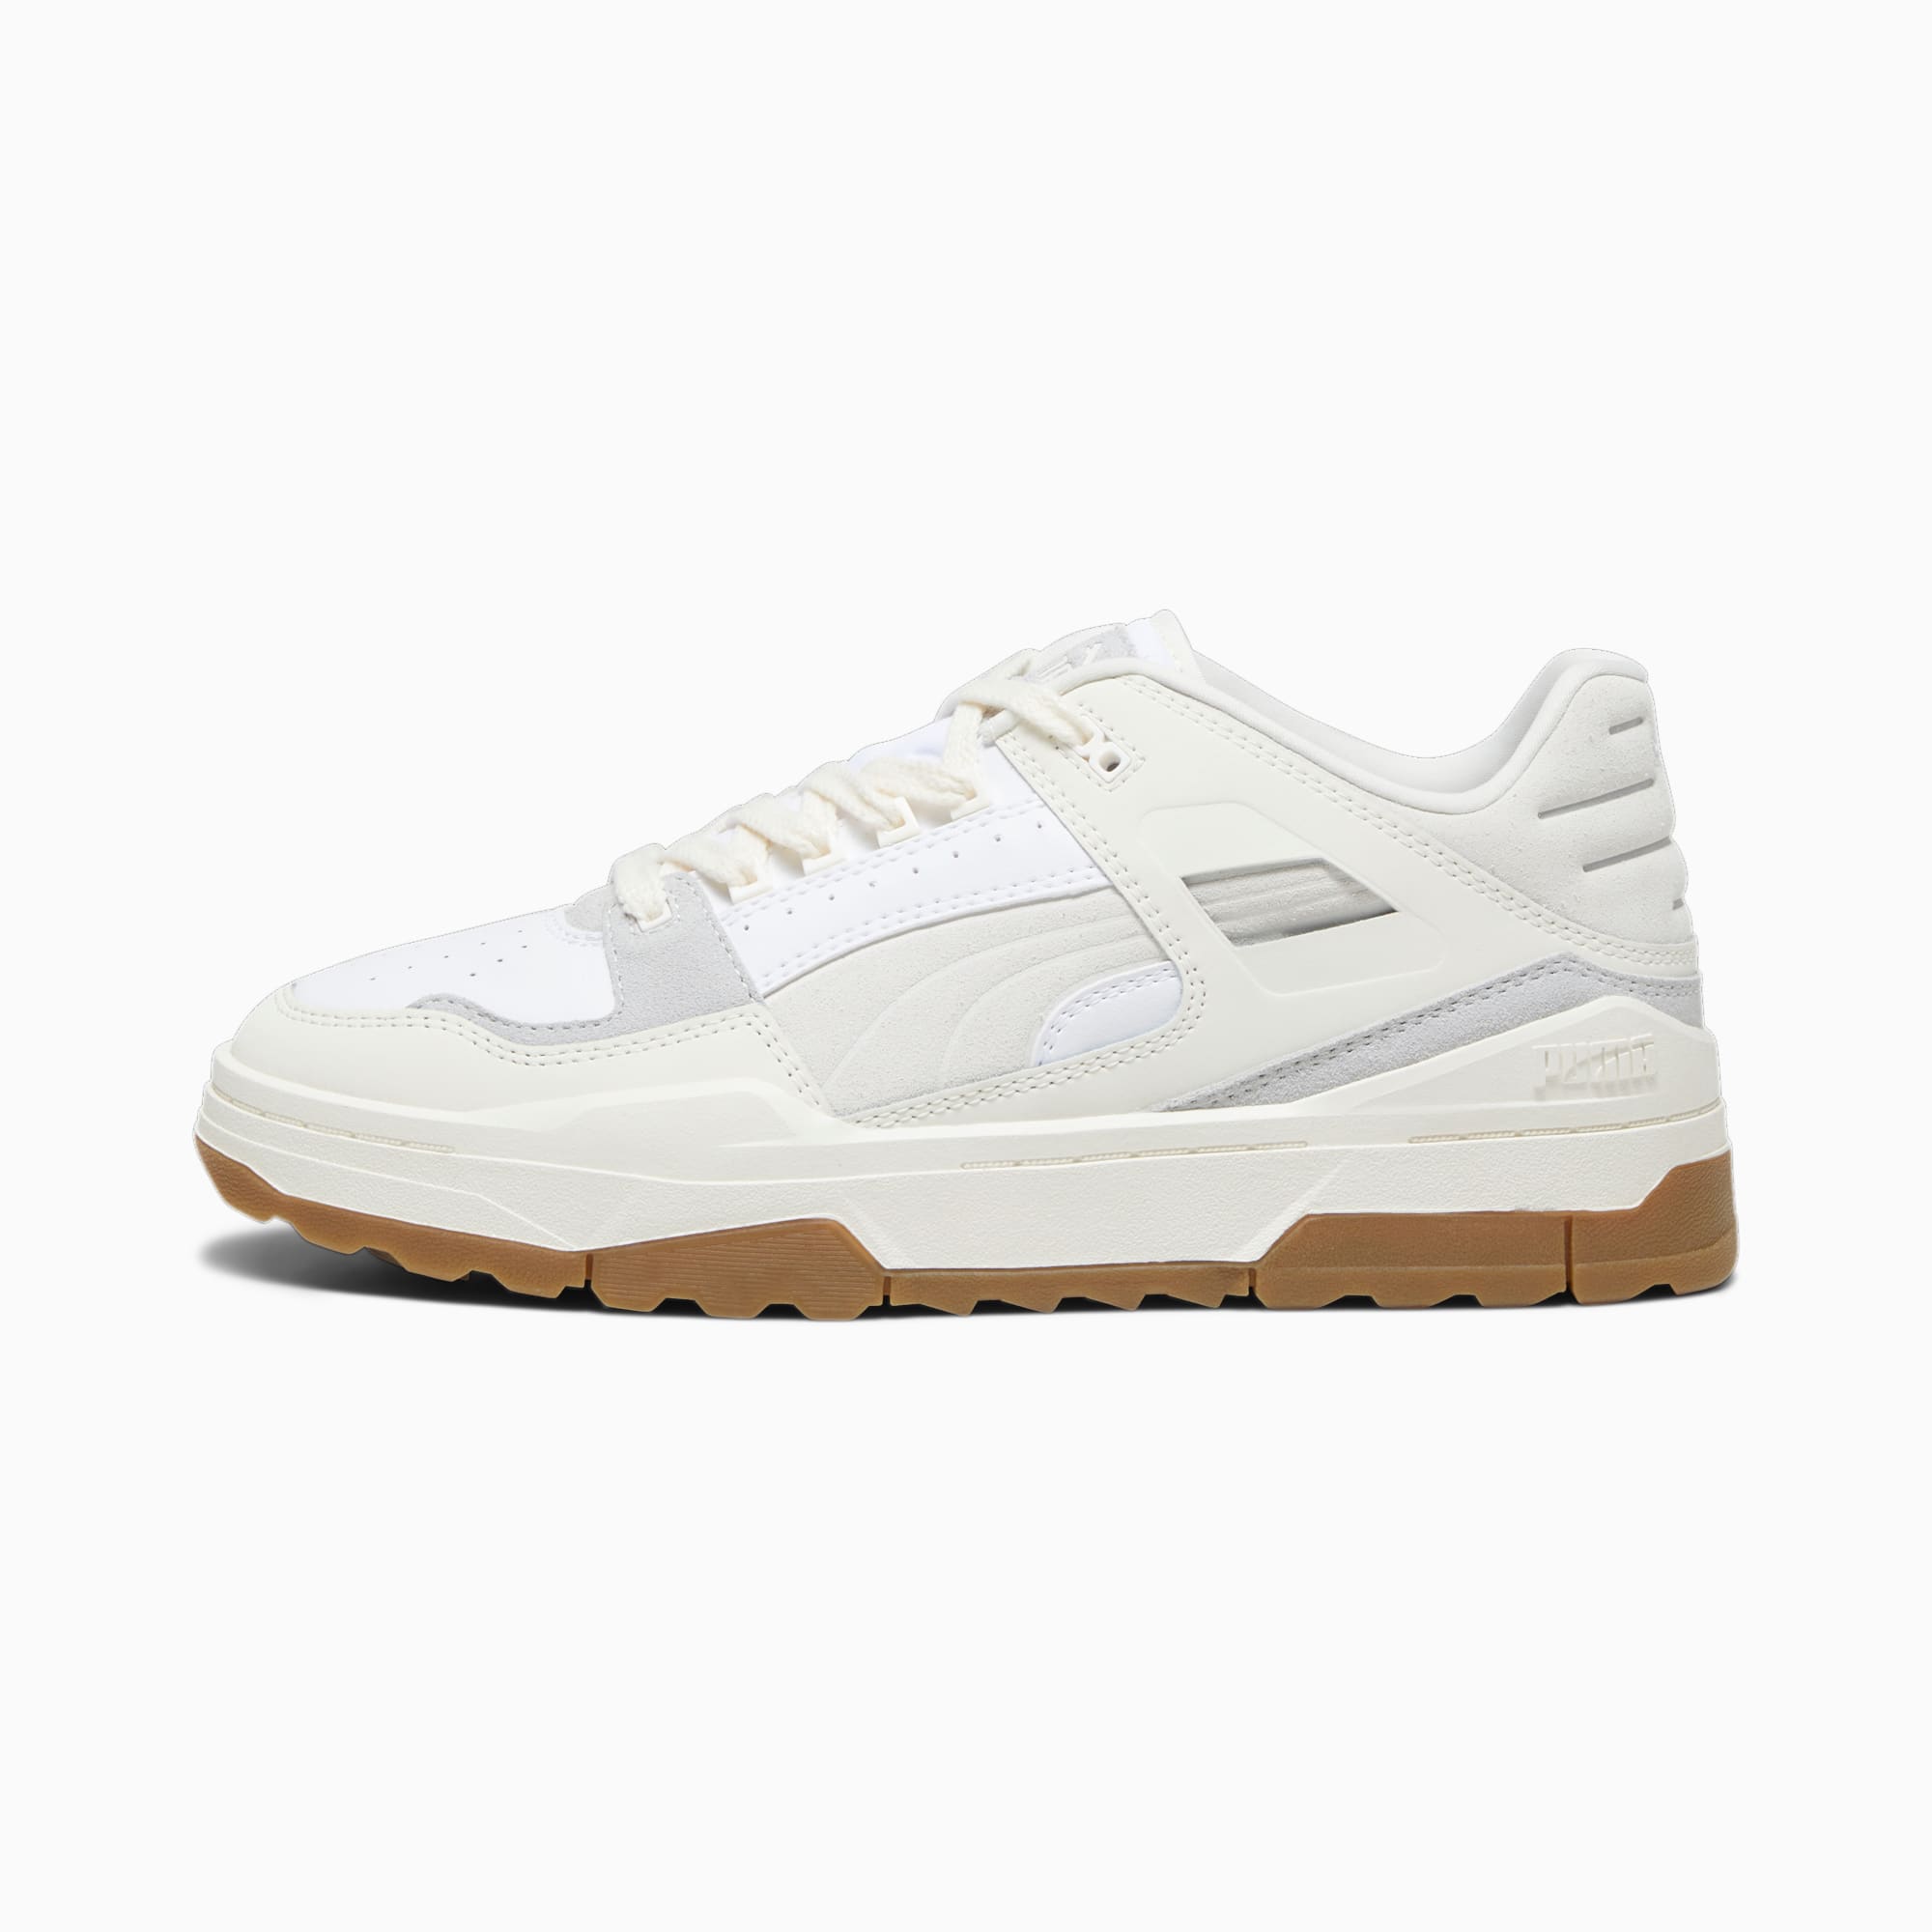 Women's PUMA Slipstream Xtreme Sneakers, White/Warm White/Cool Light Grey, Size 35,5, Shoes